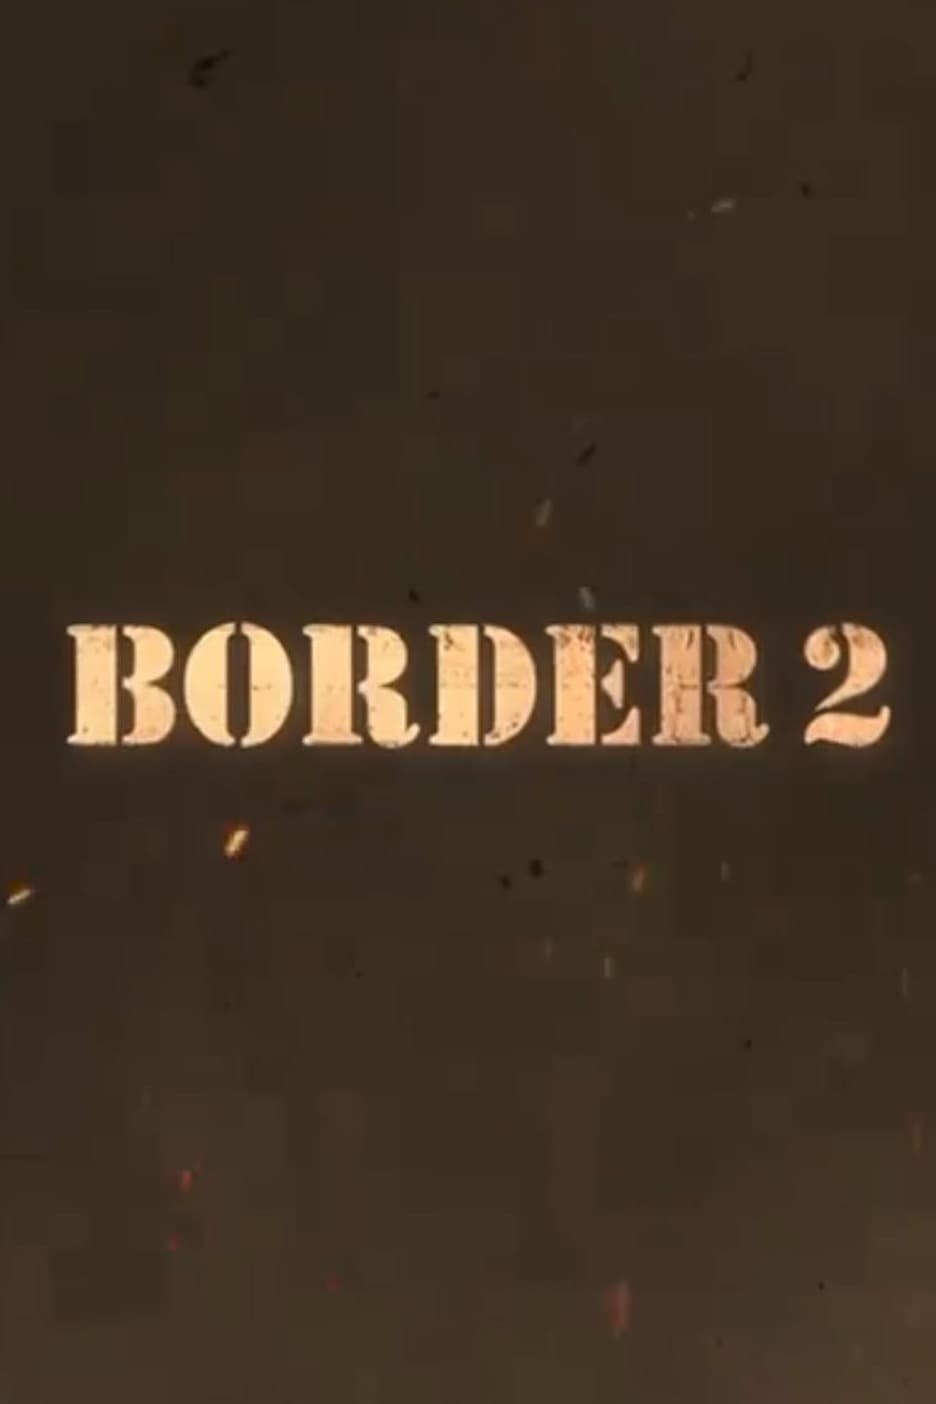 Poster for the movie "Border 2"